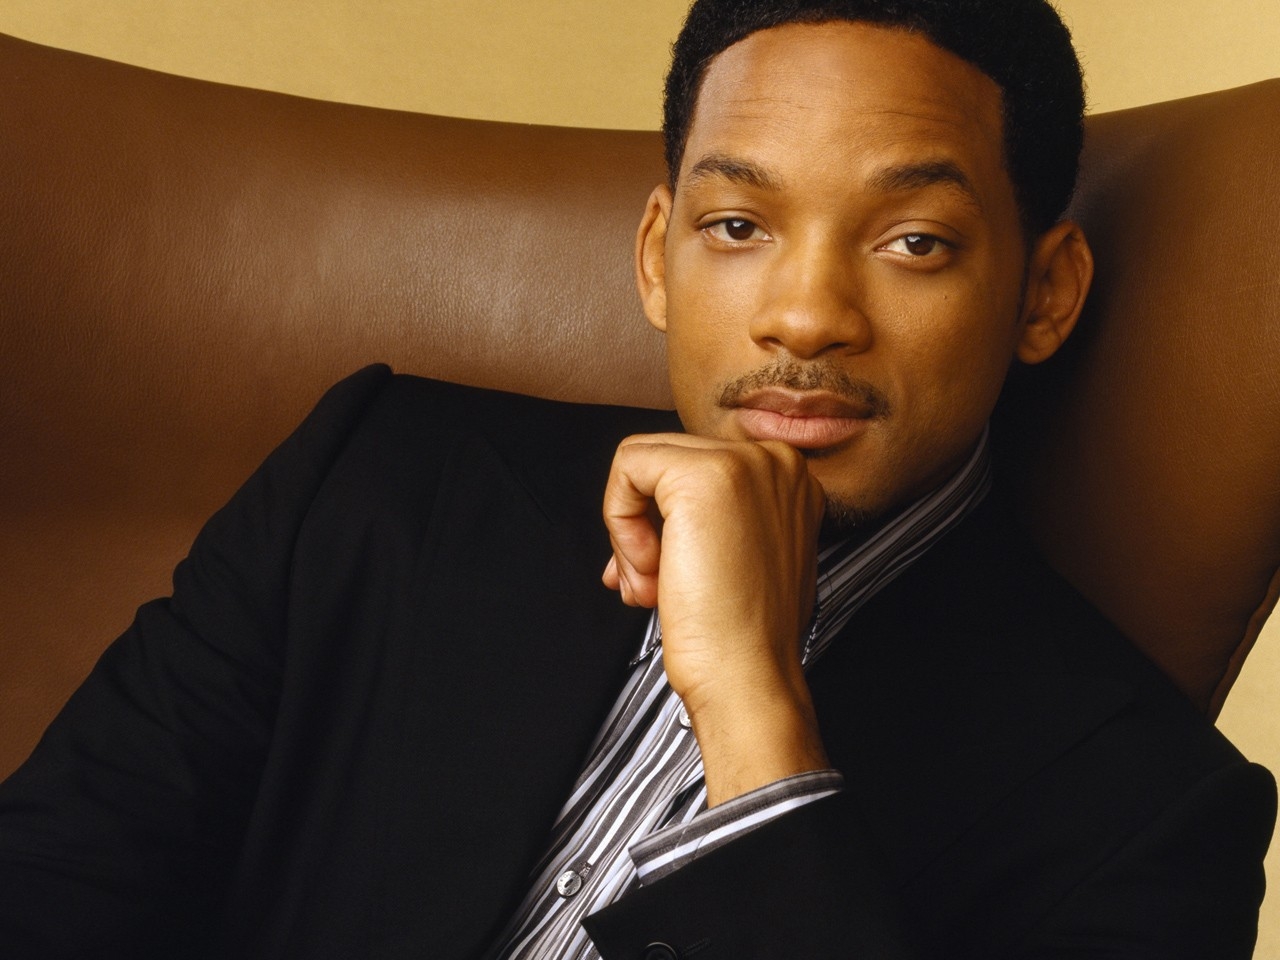 Overview of the roles and movies of actor Will Smith